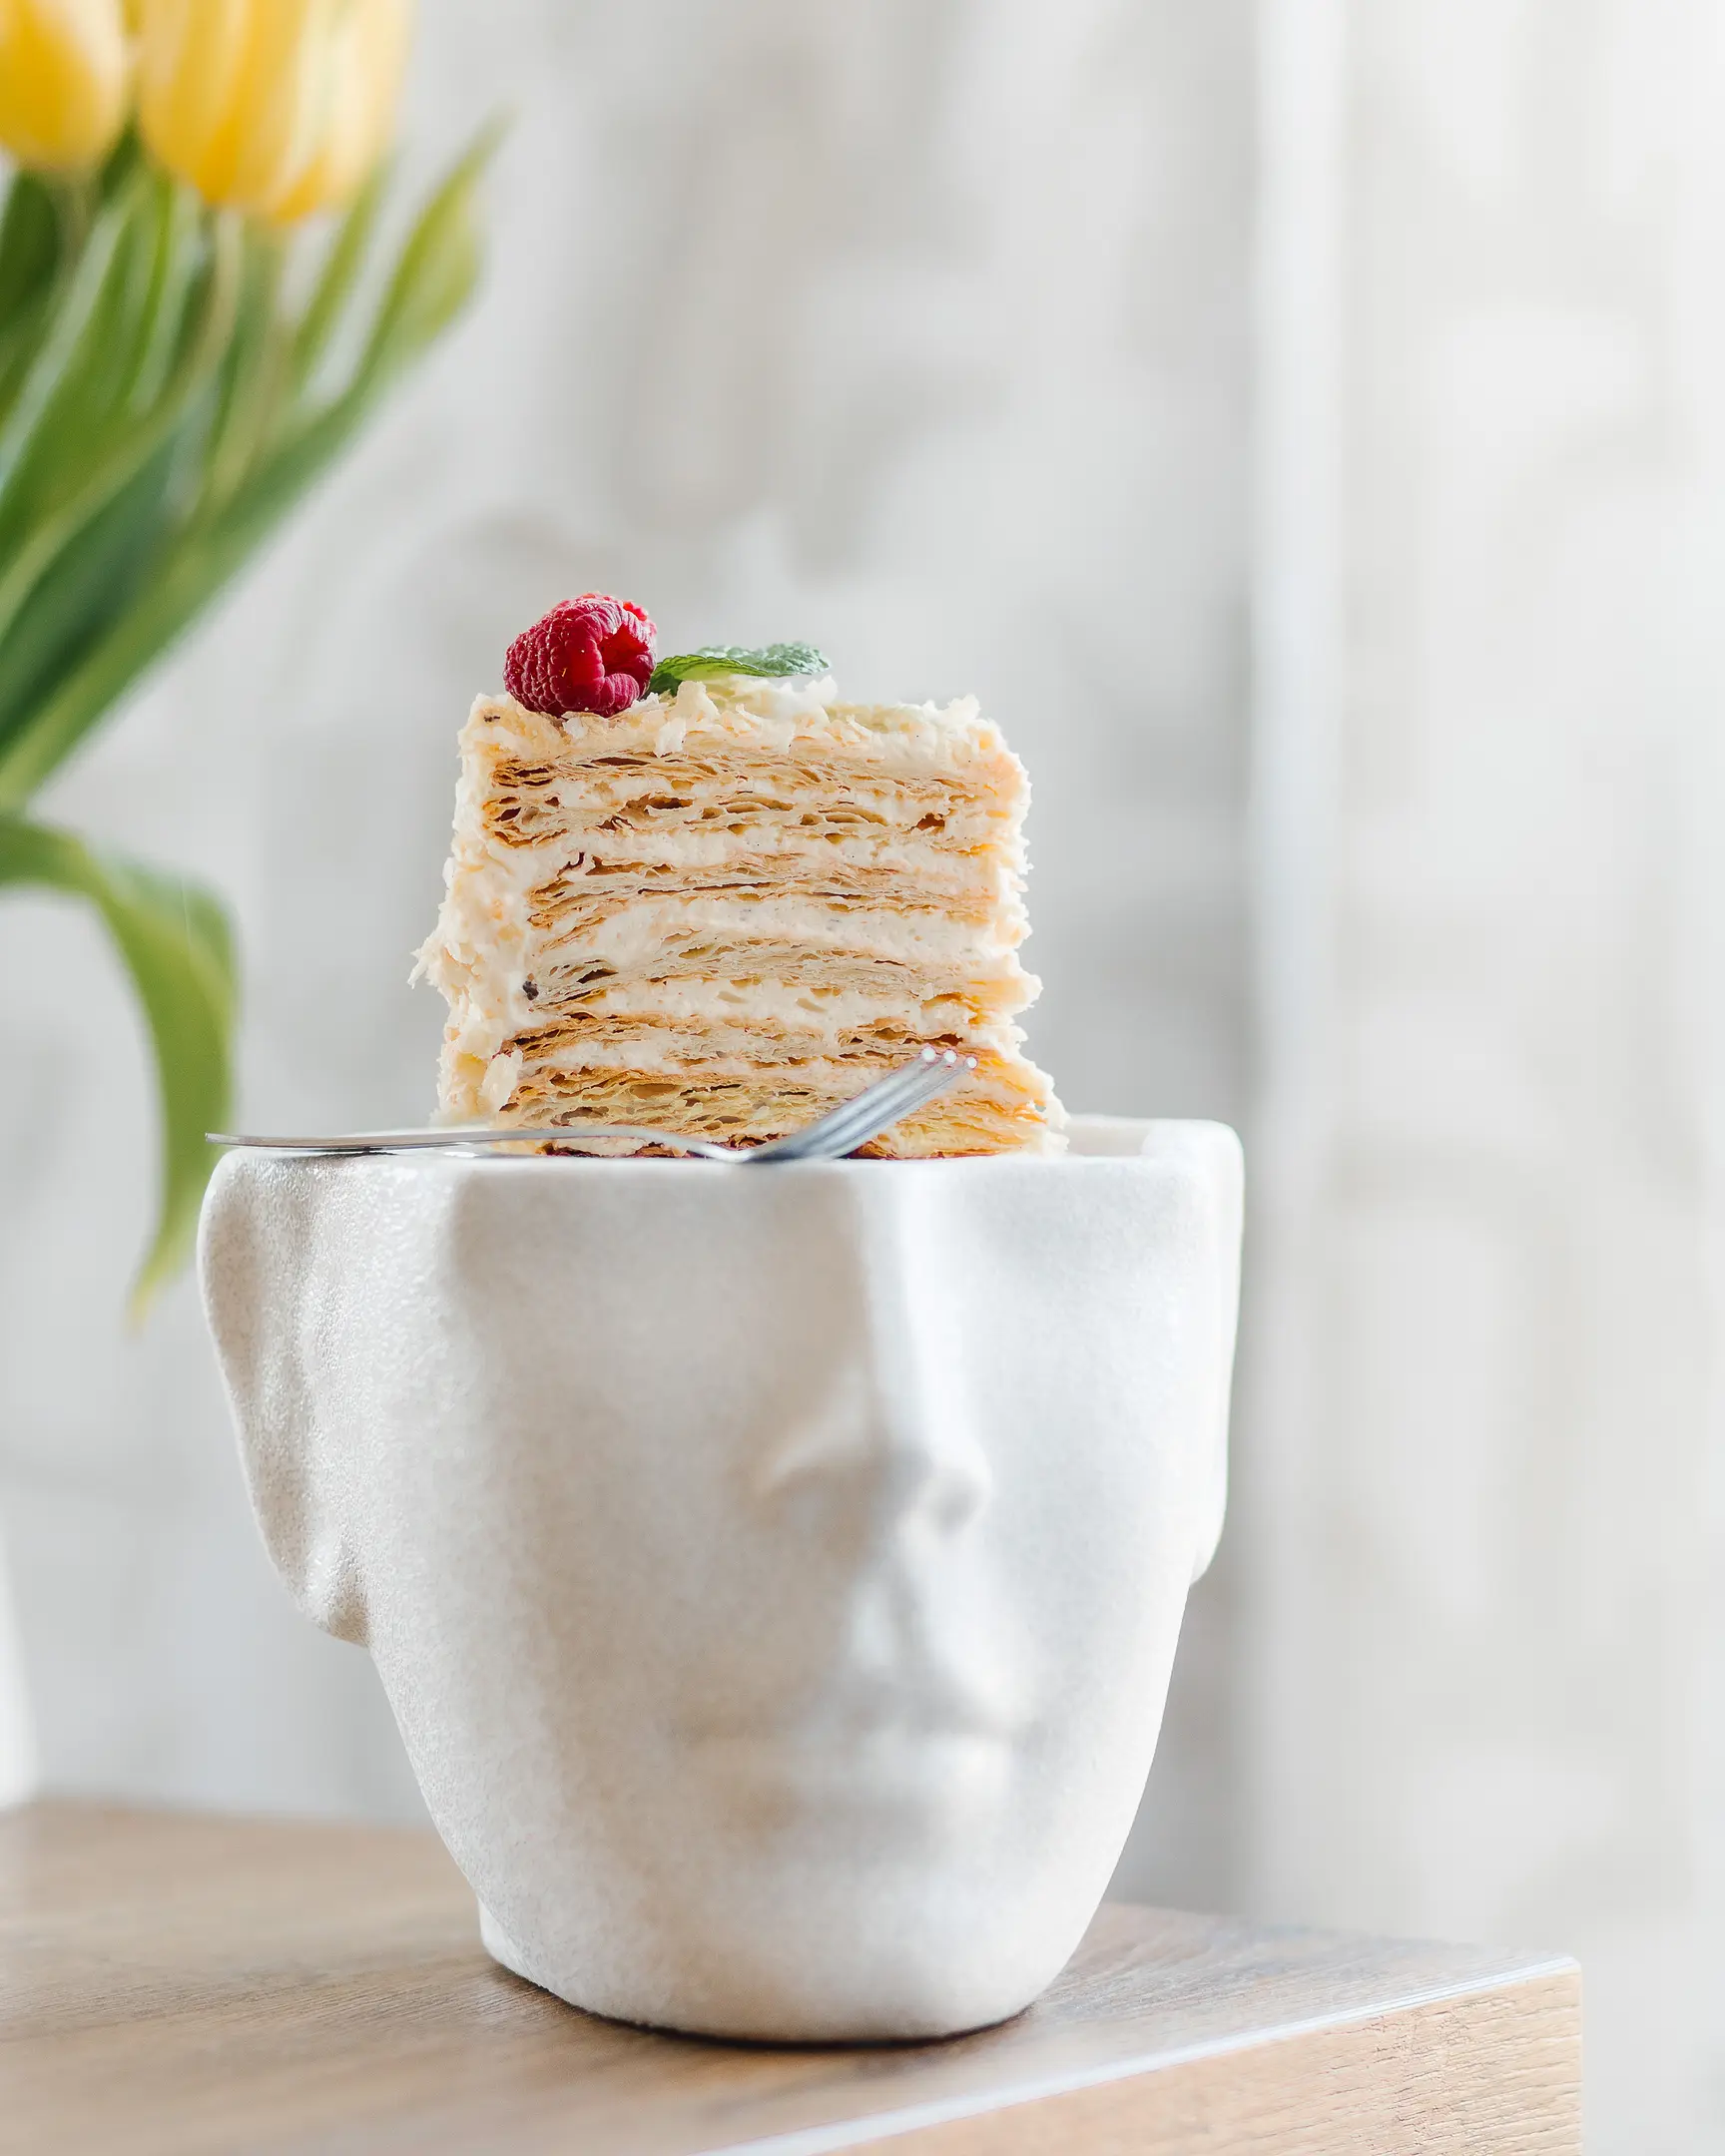 A piece of cake Napoleon. A piece of puff cake Napoleon stands on a plate in the form of a human head. The cake is on the table. In the background are flowers in a jar